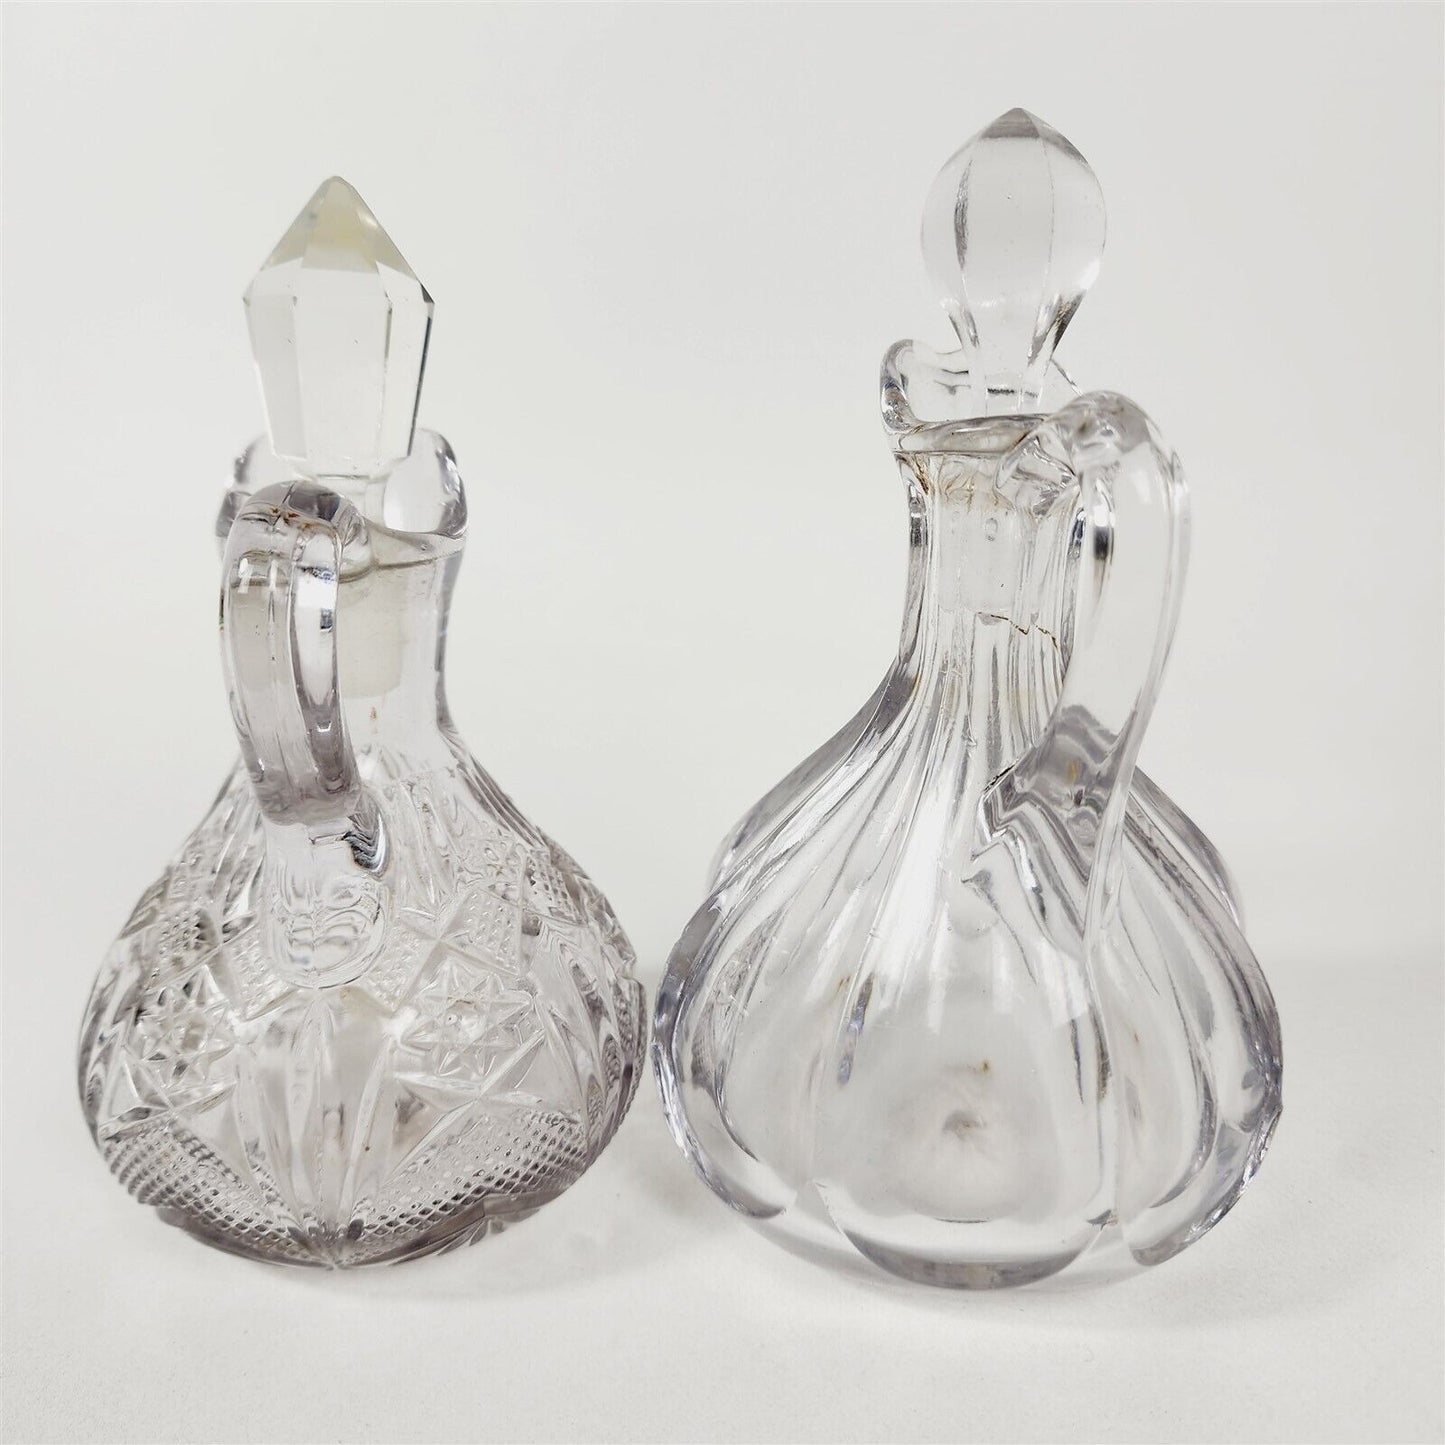 2 Vintage Cruet Decanters with Stoppers Light Purple Clear Stoppers 6-7" tall